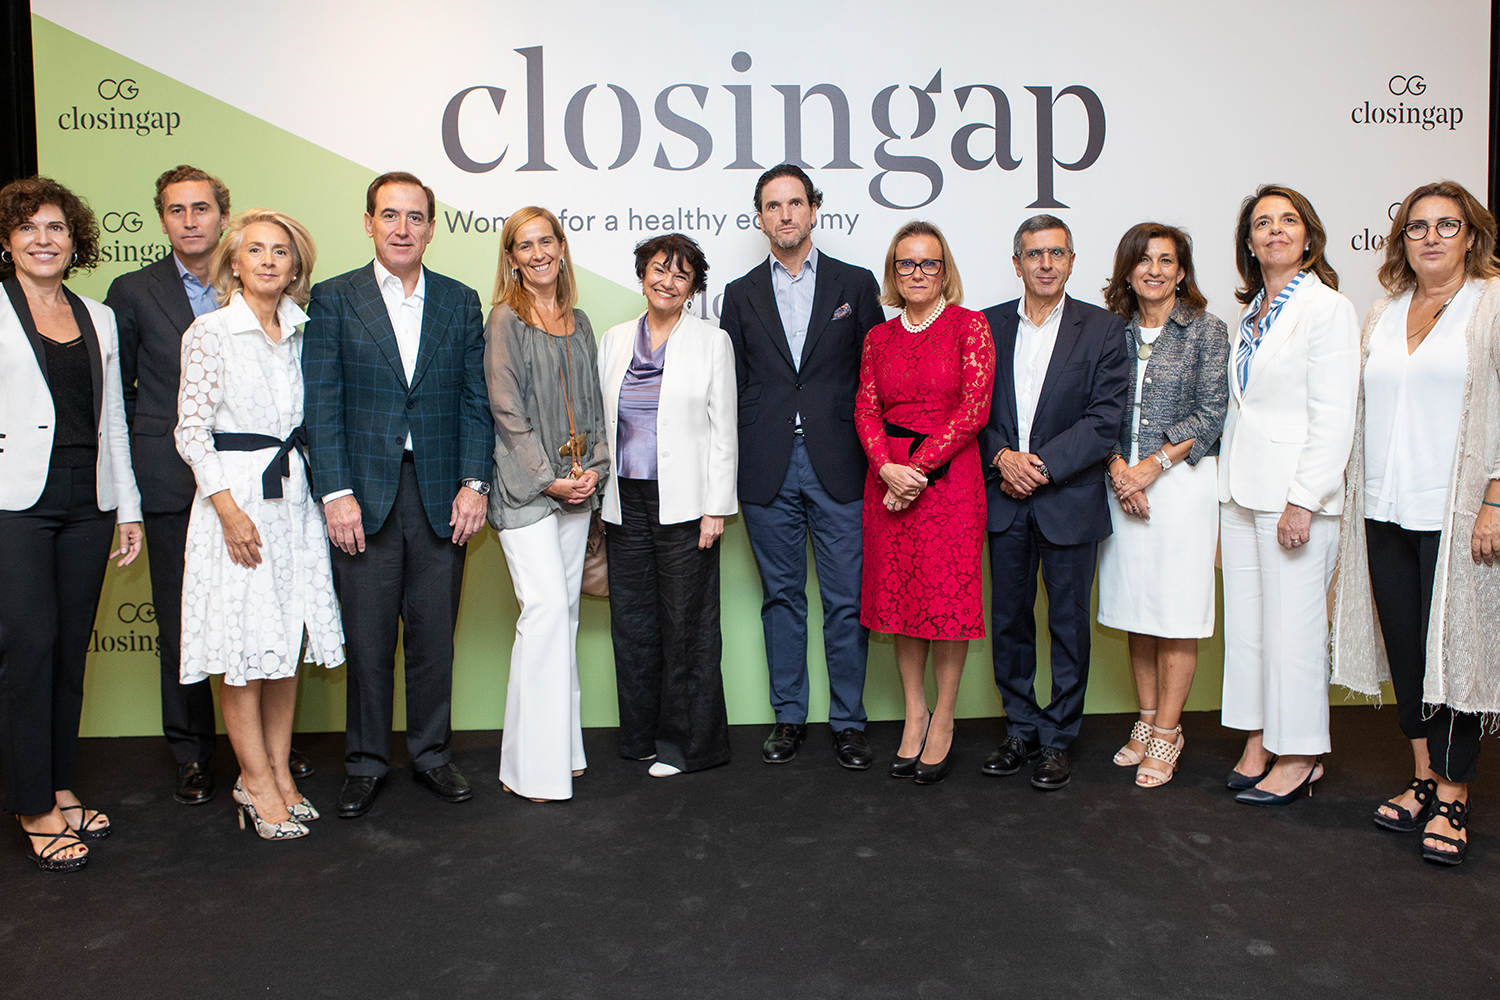 Group picture of people at a "closingap" event.